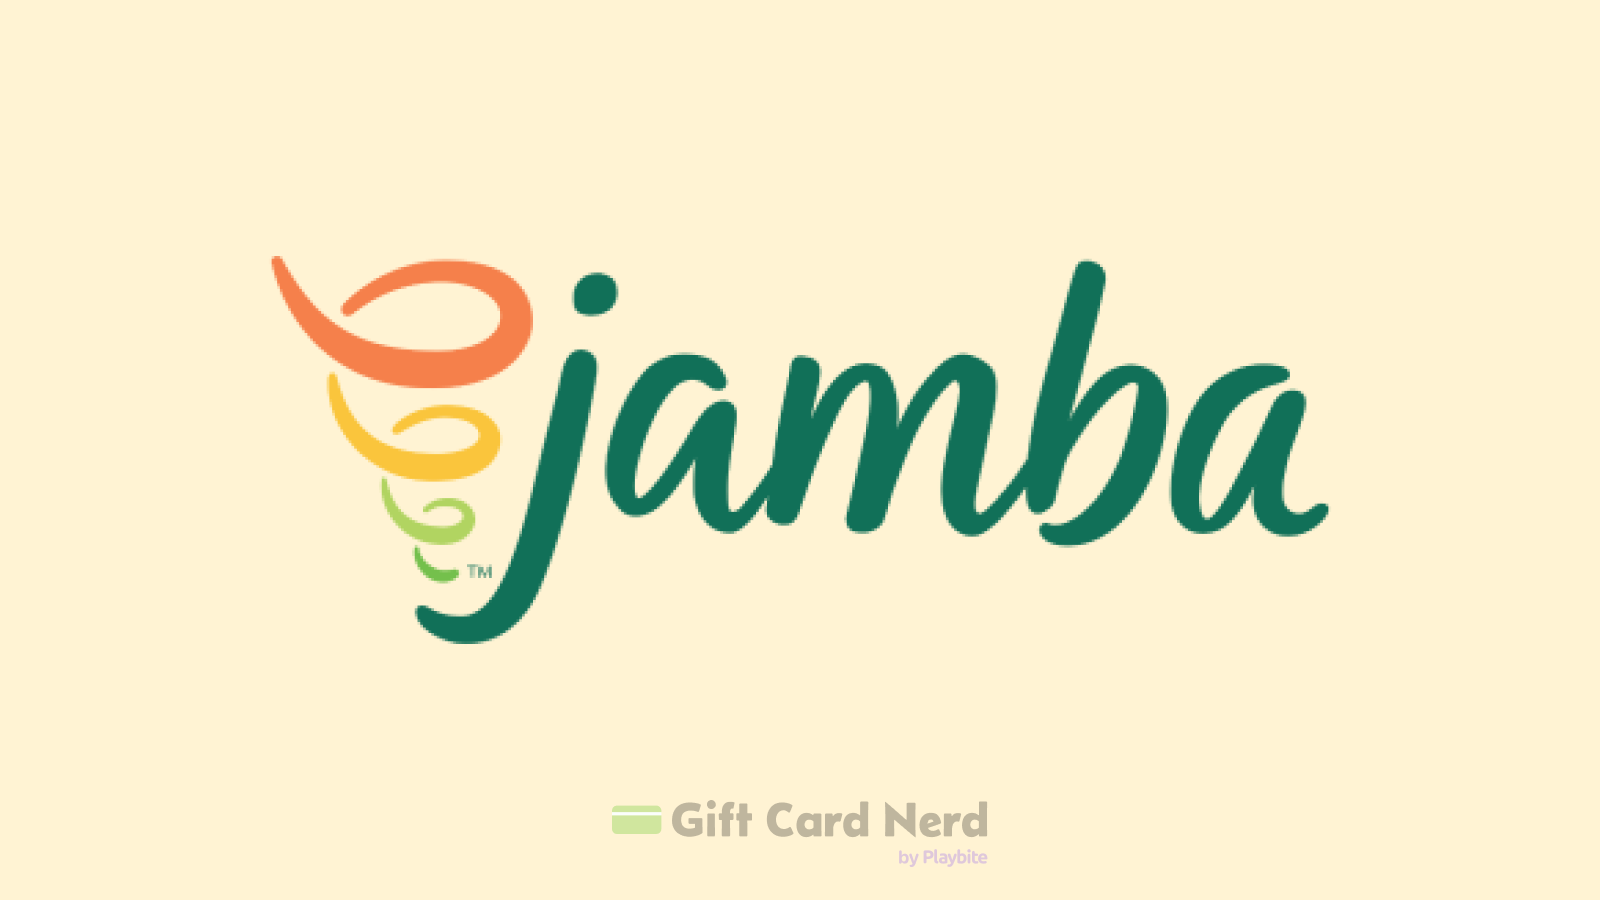 Can You Use a Jamba Juice Gift Card on Venmo?